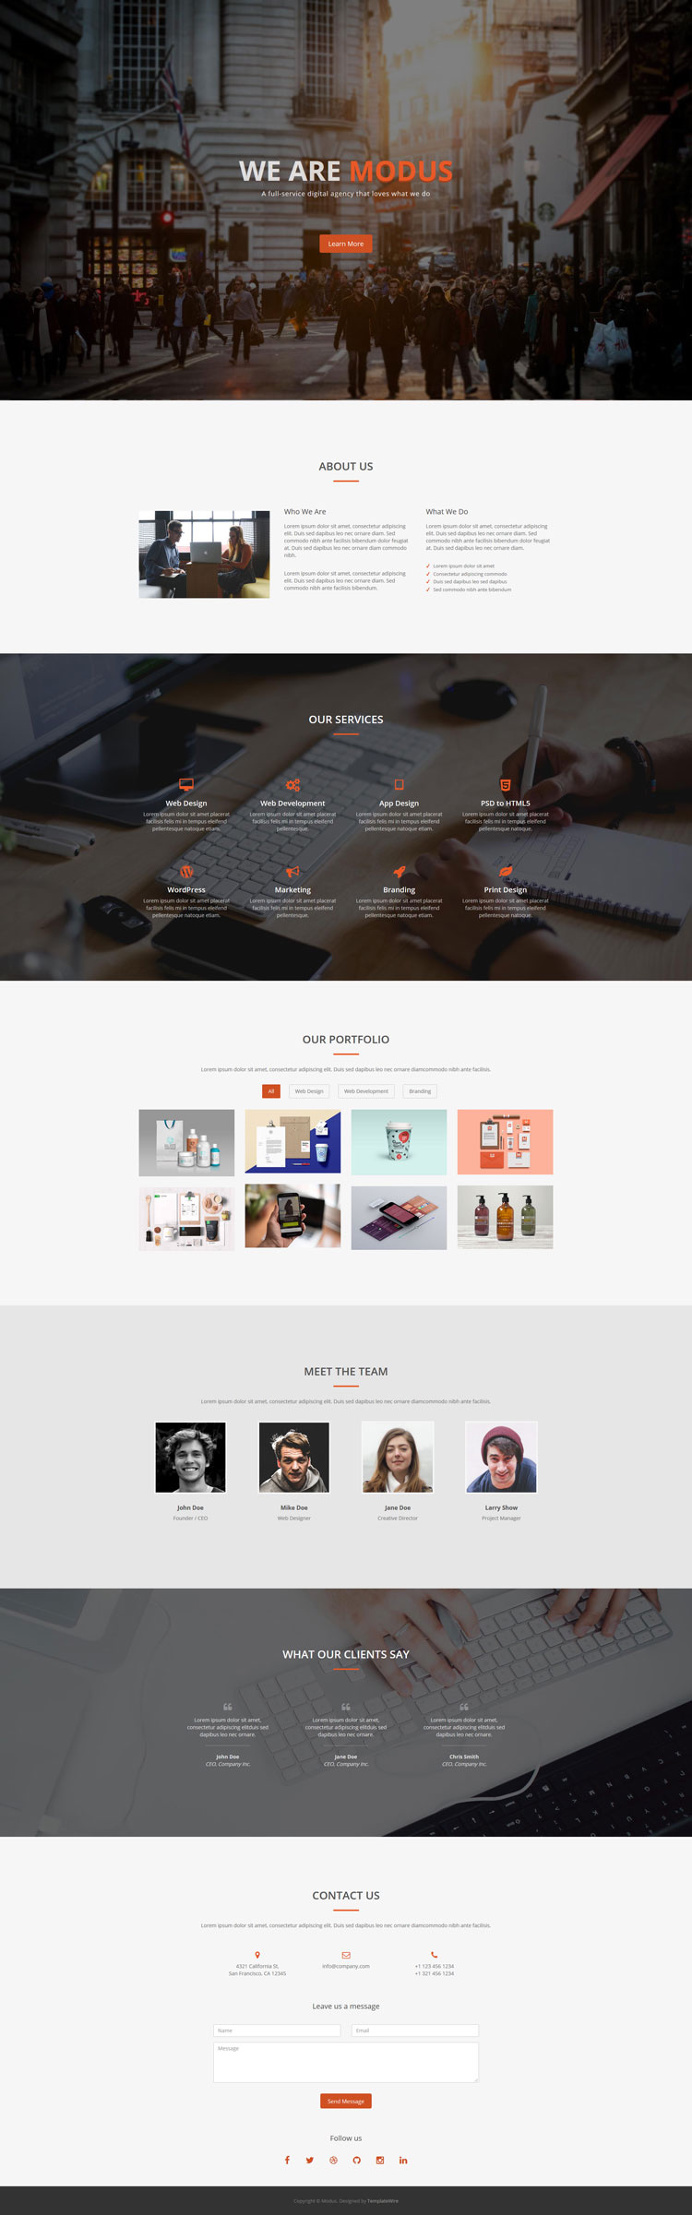 Modus - Free One Page Bootstrap Template #onepage #template #responsive #html #bootstrap